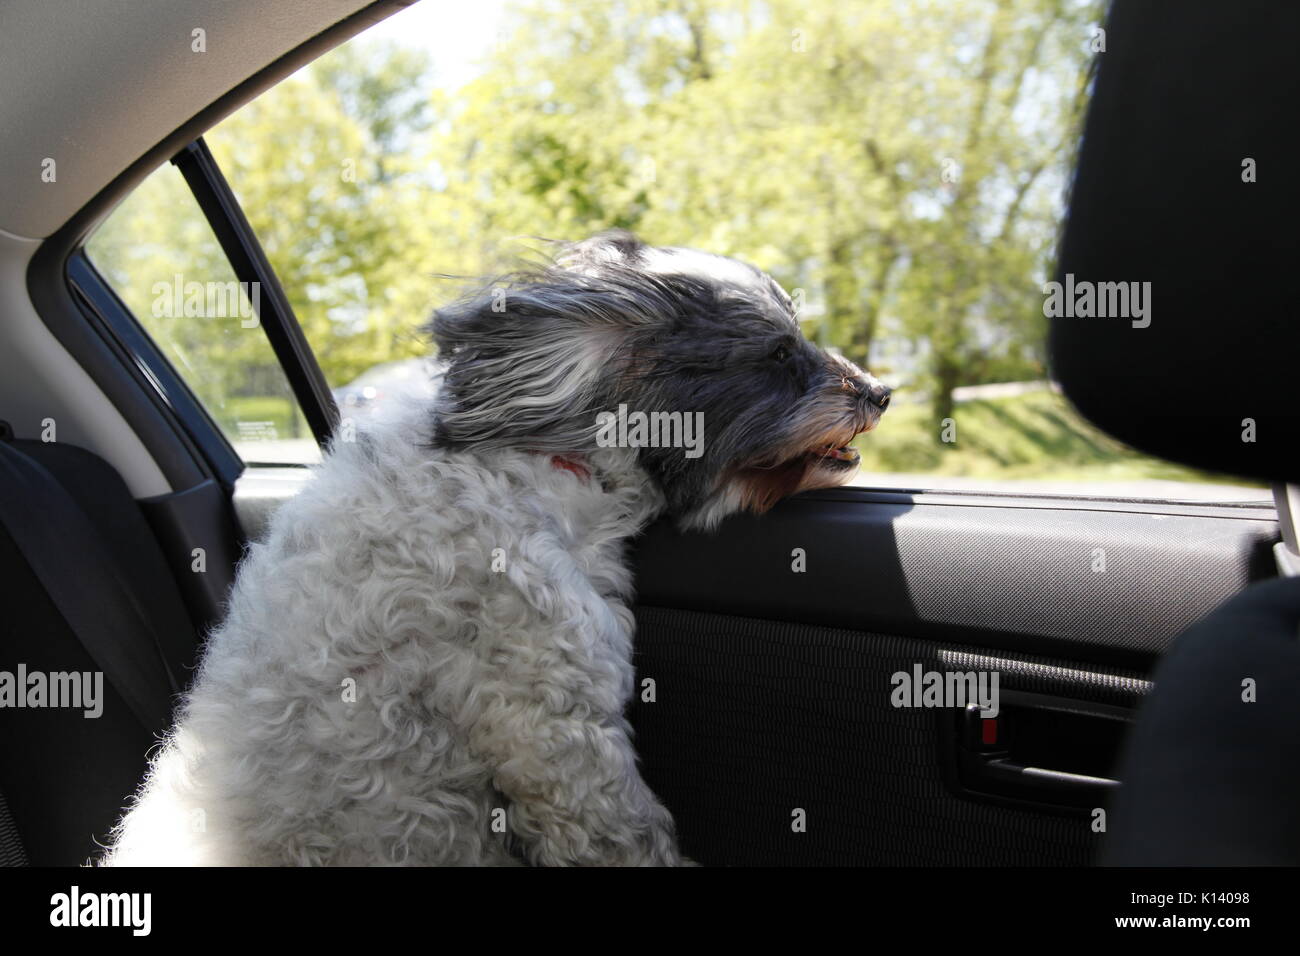 Small dog gets wind blown looking out moving car window. Stock Photo